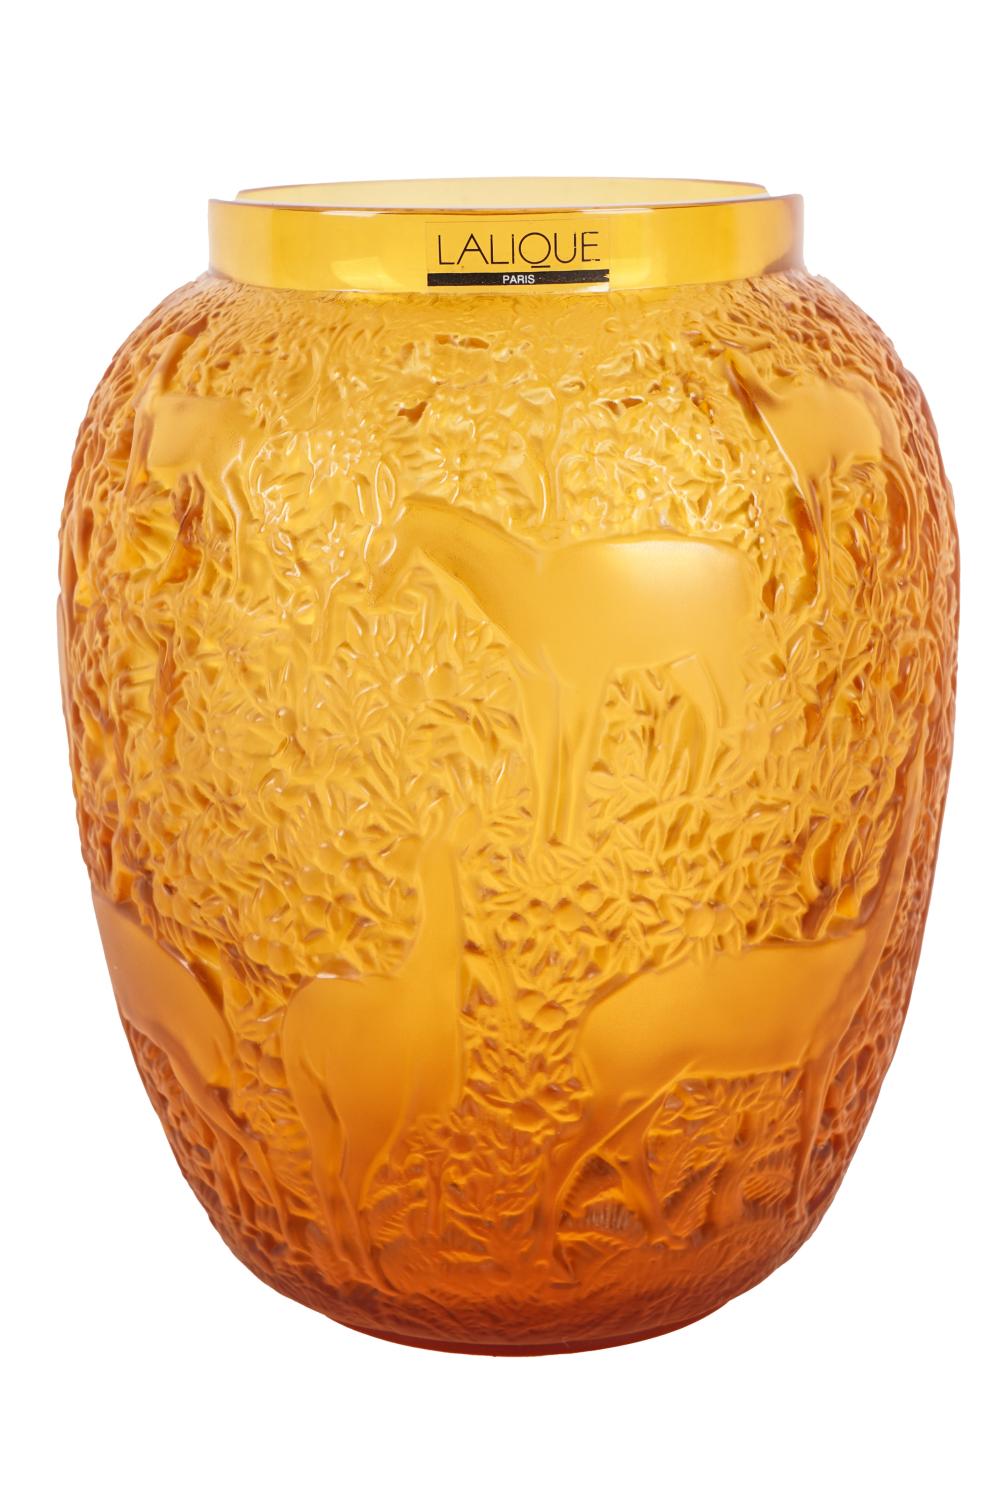 LALIQUE AMBER GLASS "BICHES" VASEsigned